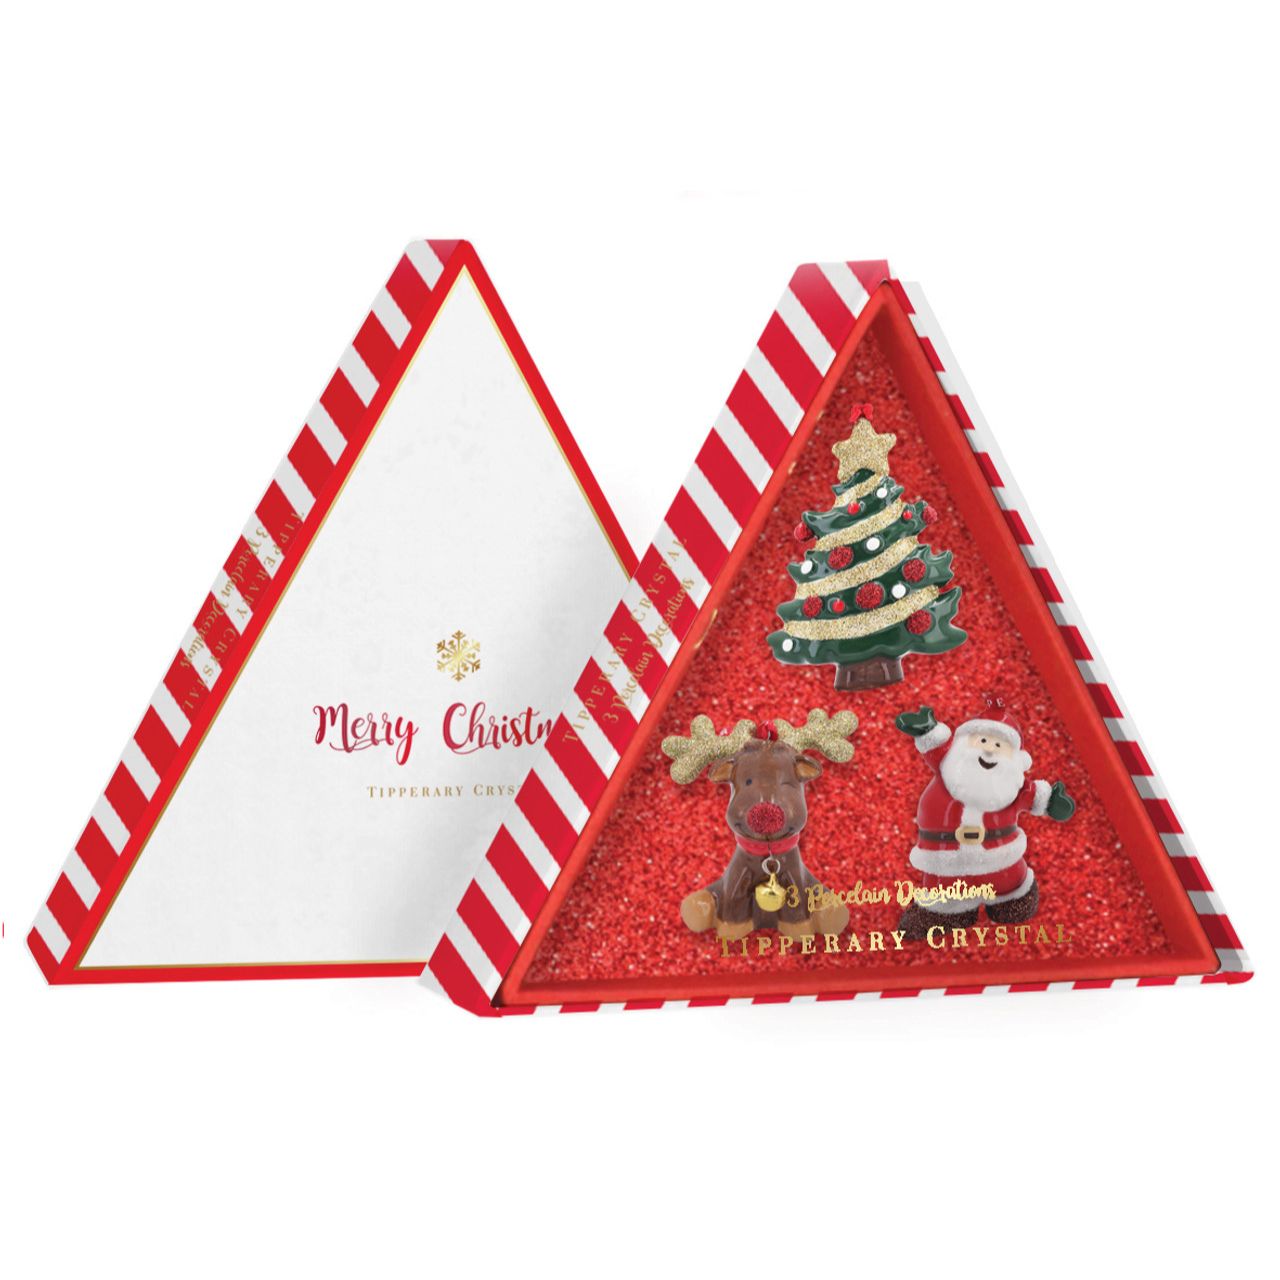 S/3 Porcelain Christmas Decorations - NEW 2022  We just Love Christmas! The festive season, the giving of gifts, creating memories and being together with family and loved ones. Have lots of fun with our lovingly designed and created Christmas decorations, each one has a magic sparkle of elf dust!